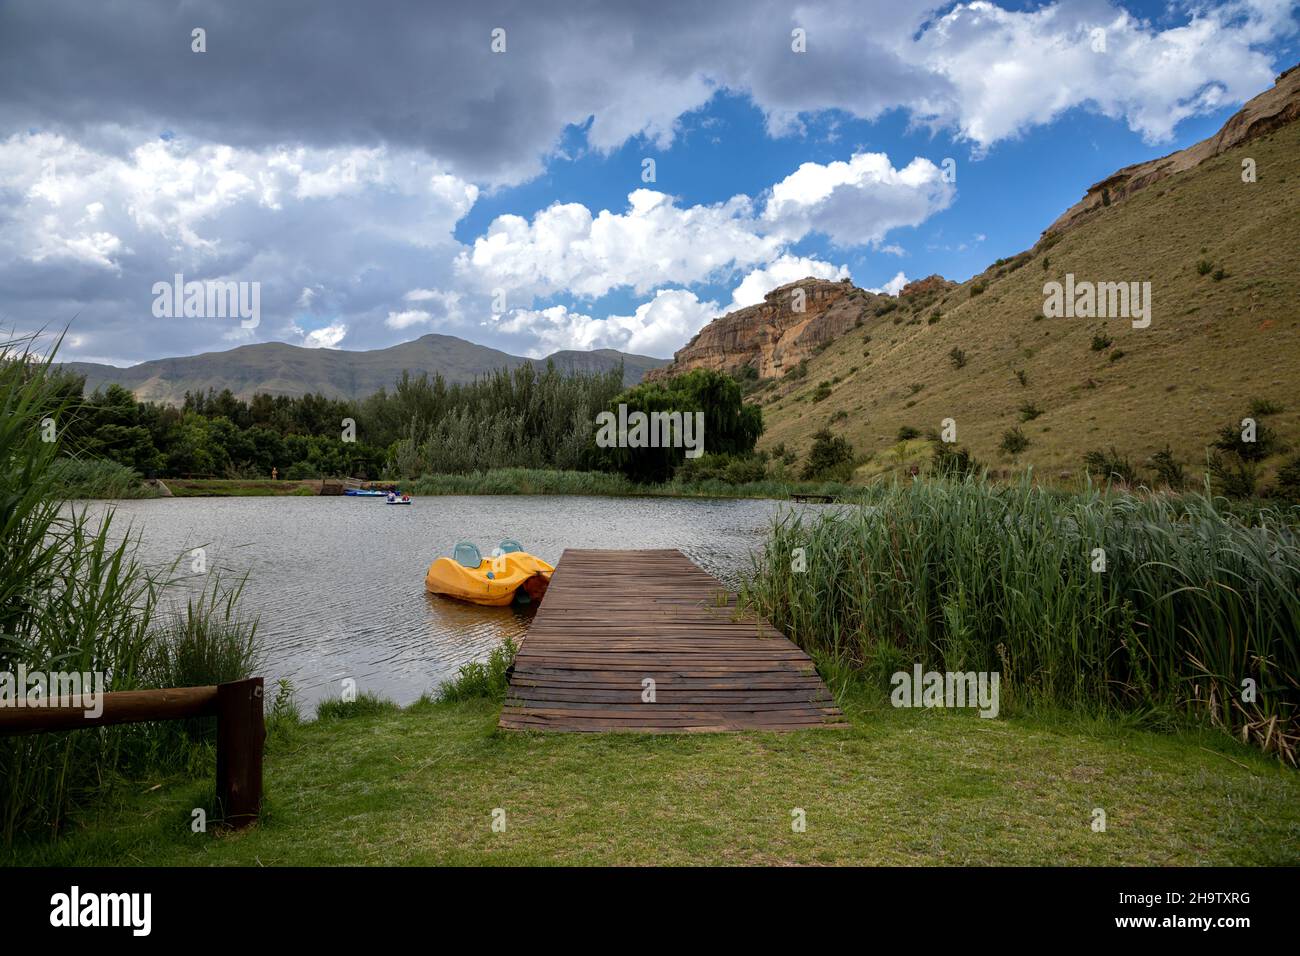 Countryside scene of a wooden jetty with a yellow paddle boat next to it in a lake. There is clouds in the sky Stock Photo